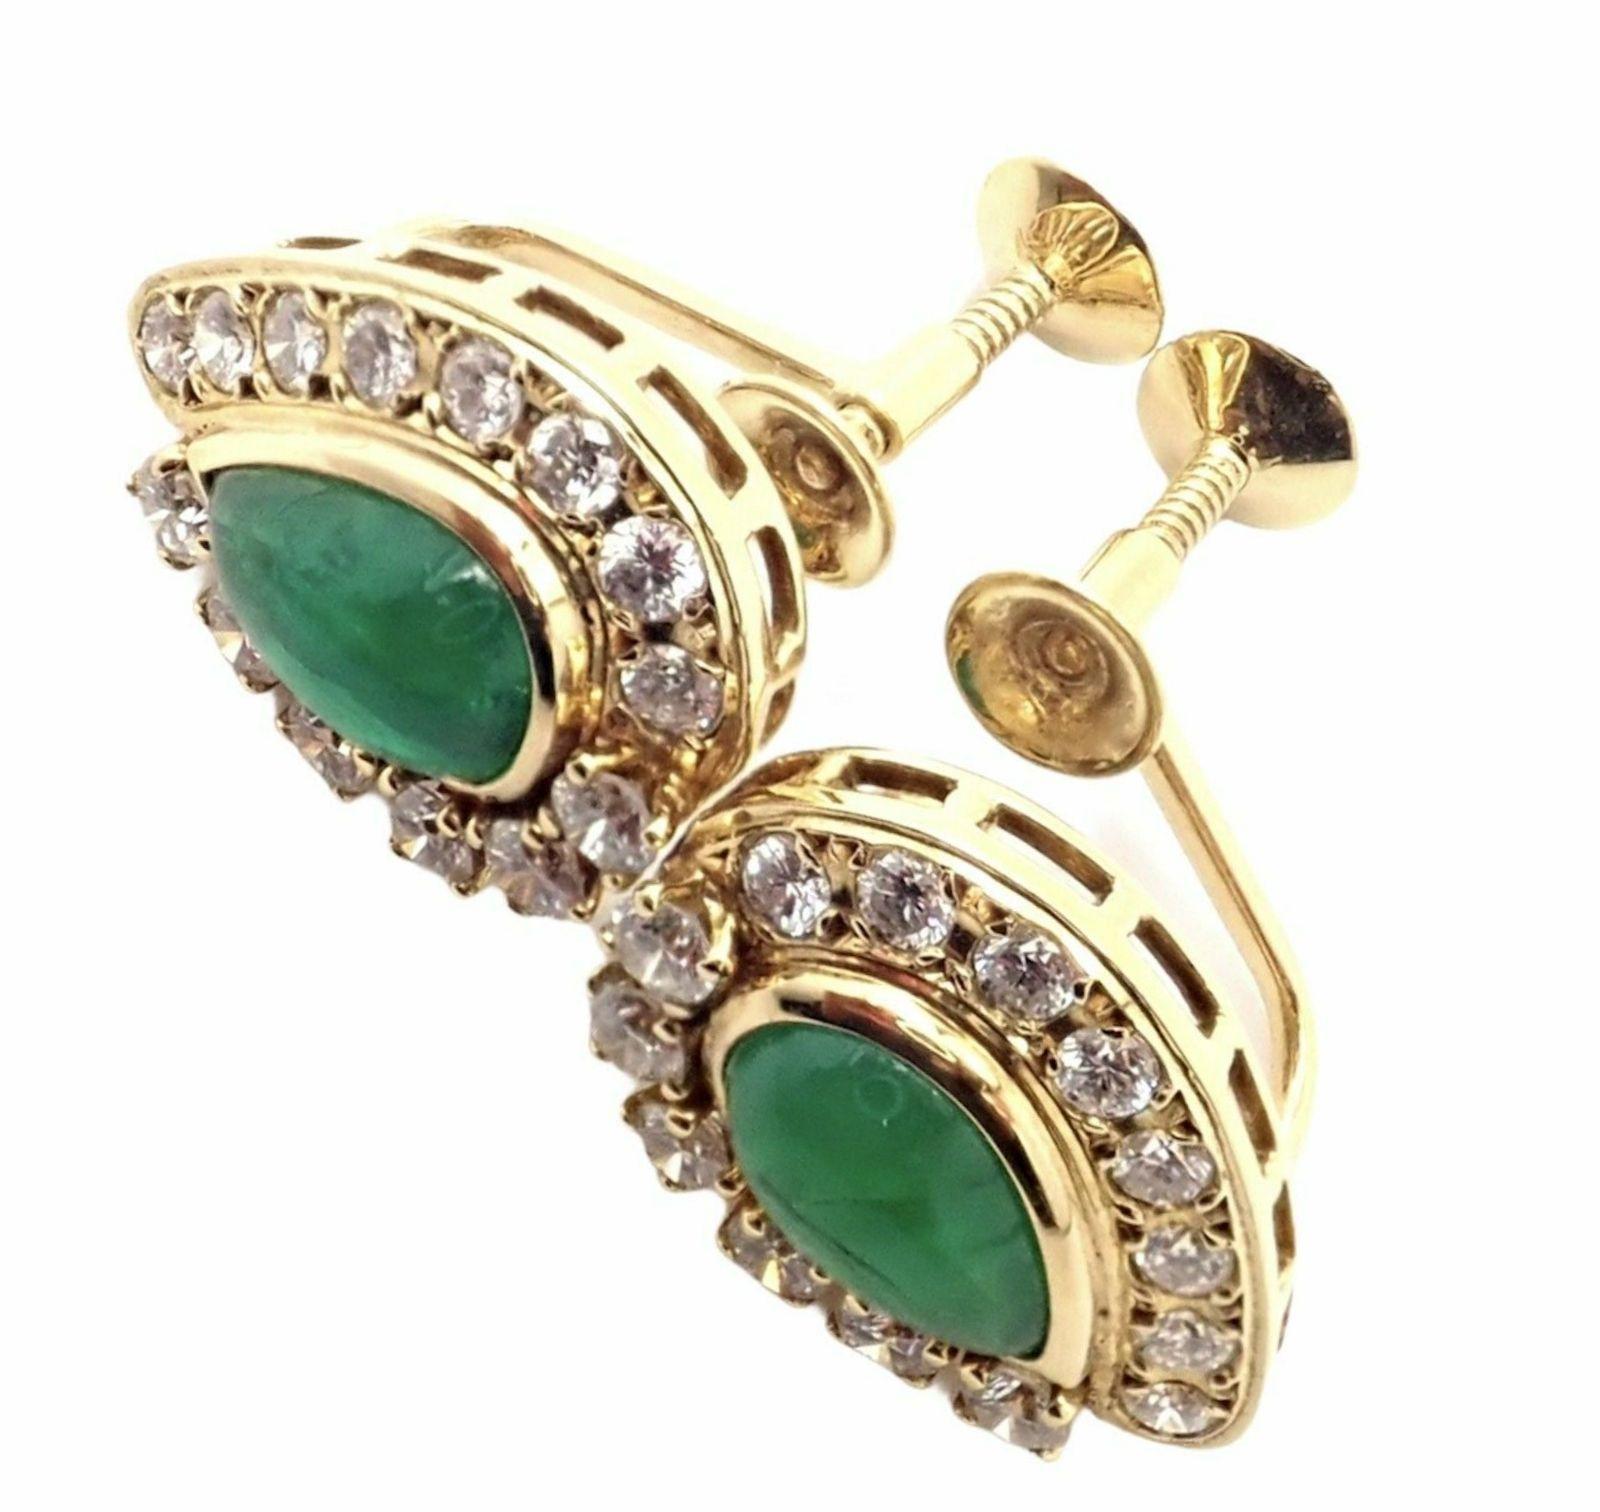 18k Yellow Gold Diamond And Emerald Teardrop Earrings by Mikimoto. 
With 28 round brilliant cut diamonds VS1 clarity, G color total weight approximately 0.95ct
2 pear shape emeralds total weight approximately 2.27ct
Details: 
Measurements: 12mm x